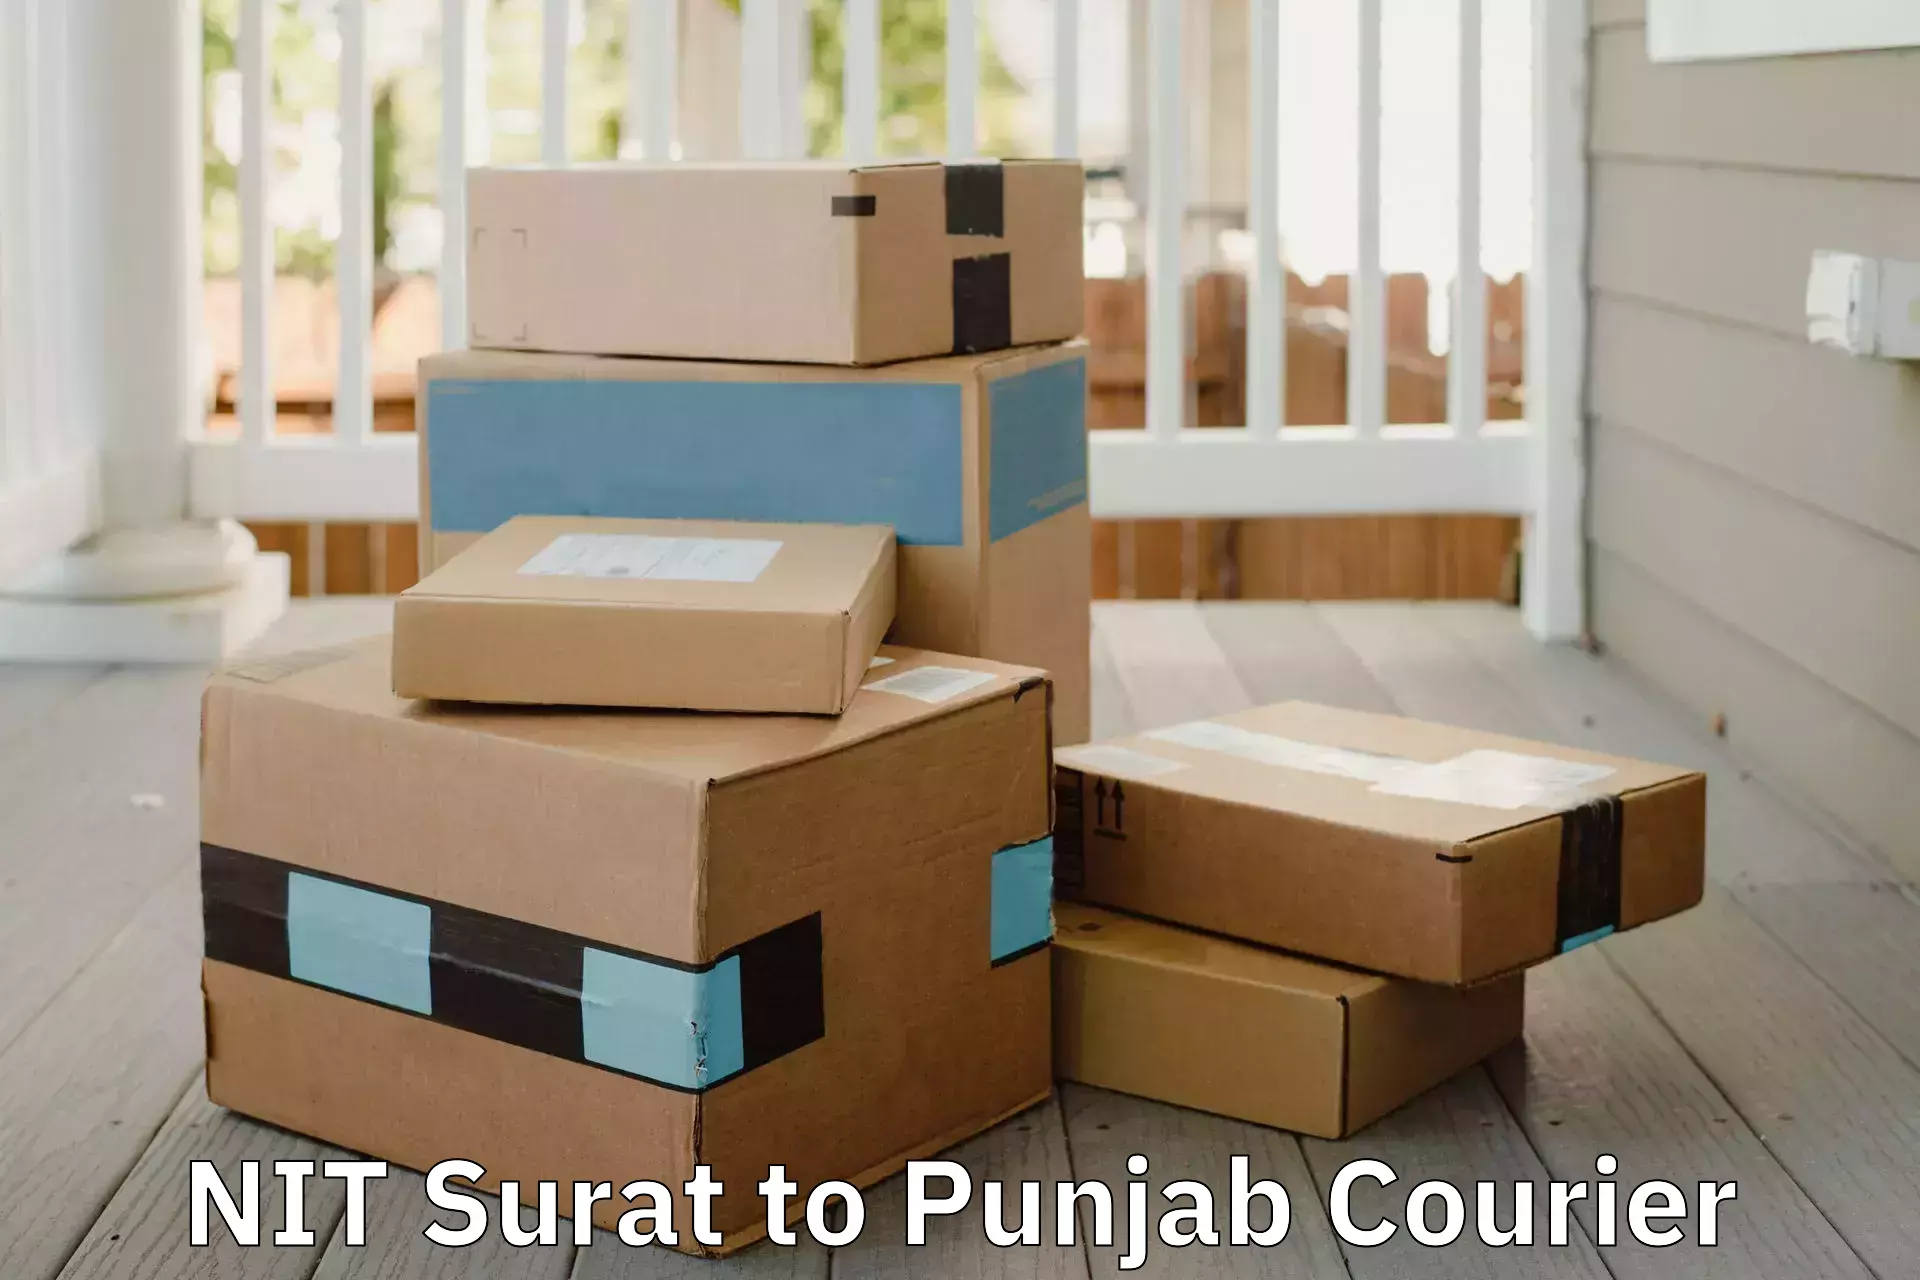 Quality moving company NIT Surat to Amritsar